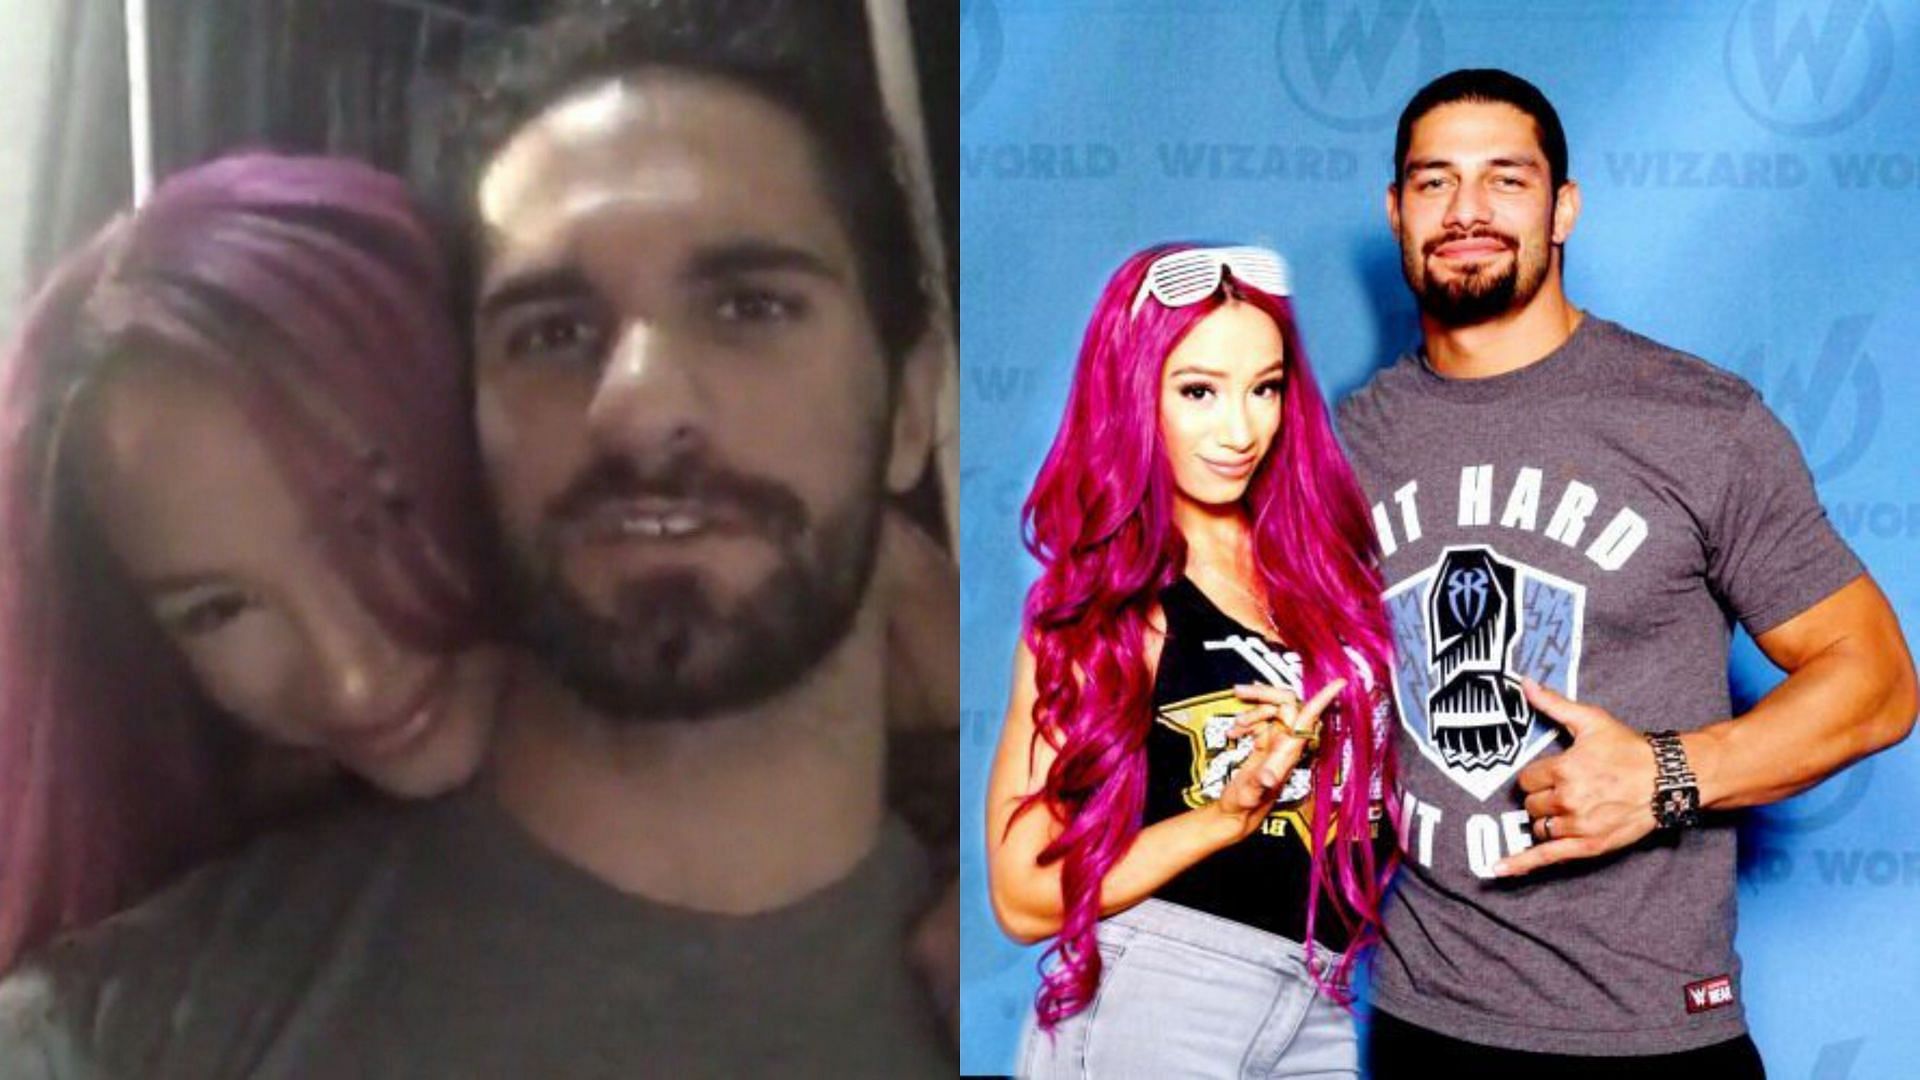 5 WWE Superstars that Sasha Banks has been romantically linked with in real life